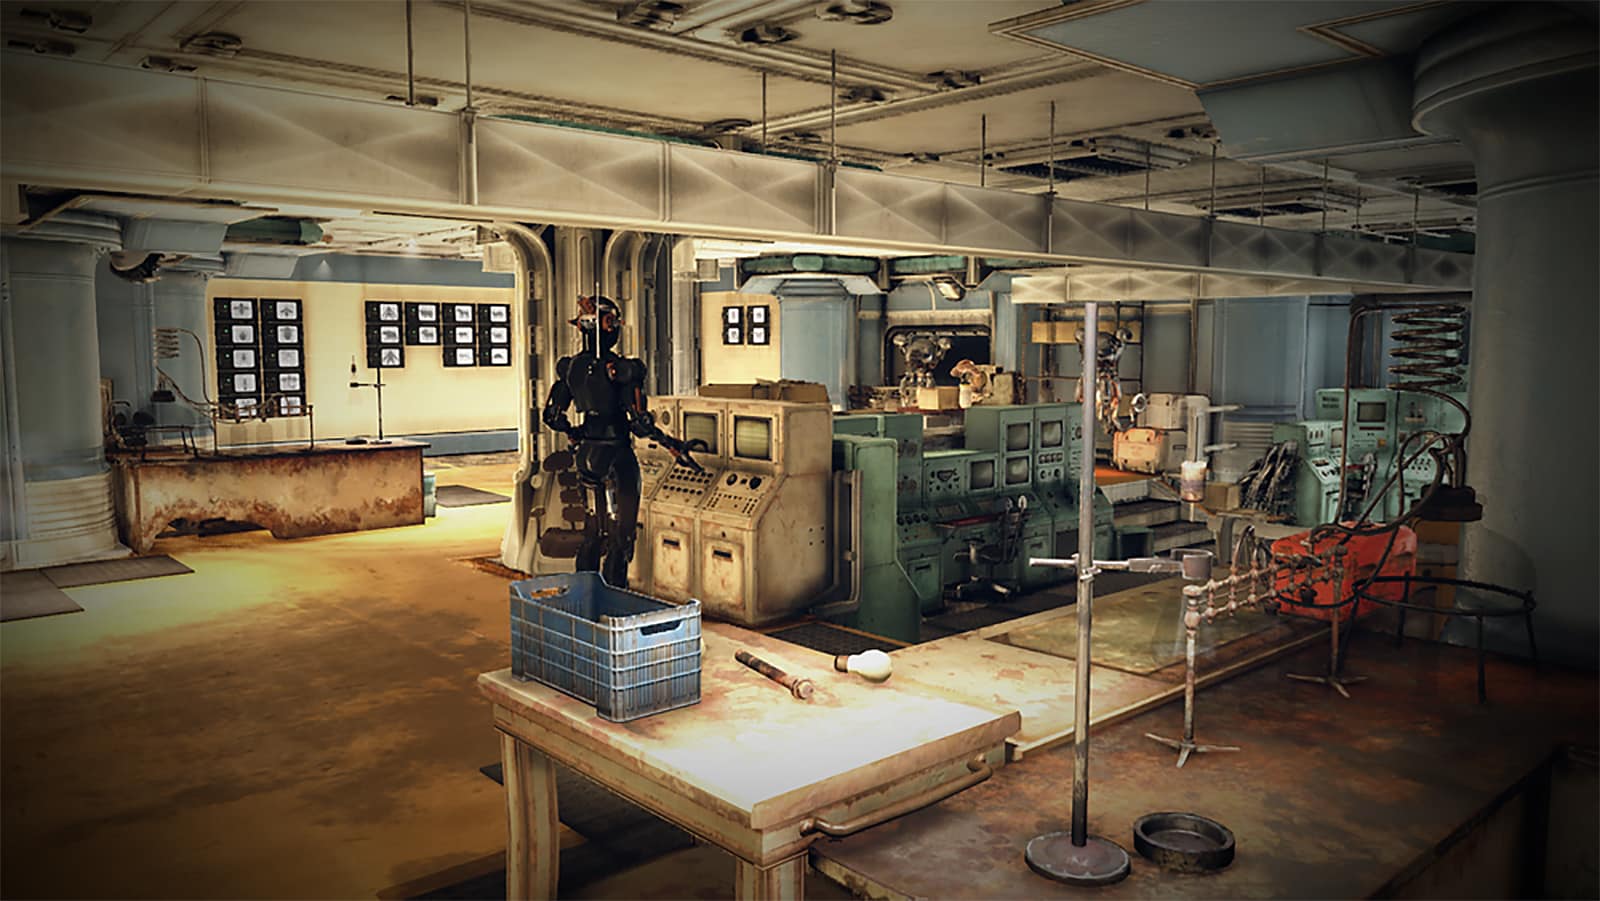 The genetics lab in The Whitespring Bunker in Fallout 76